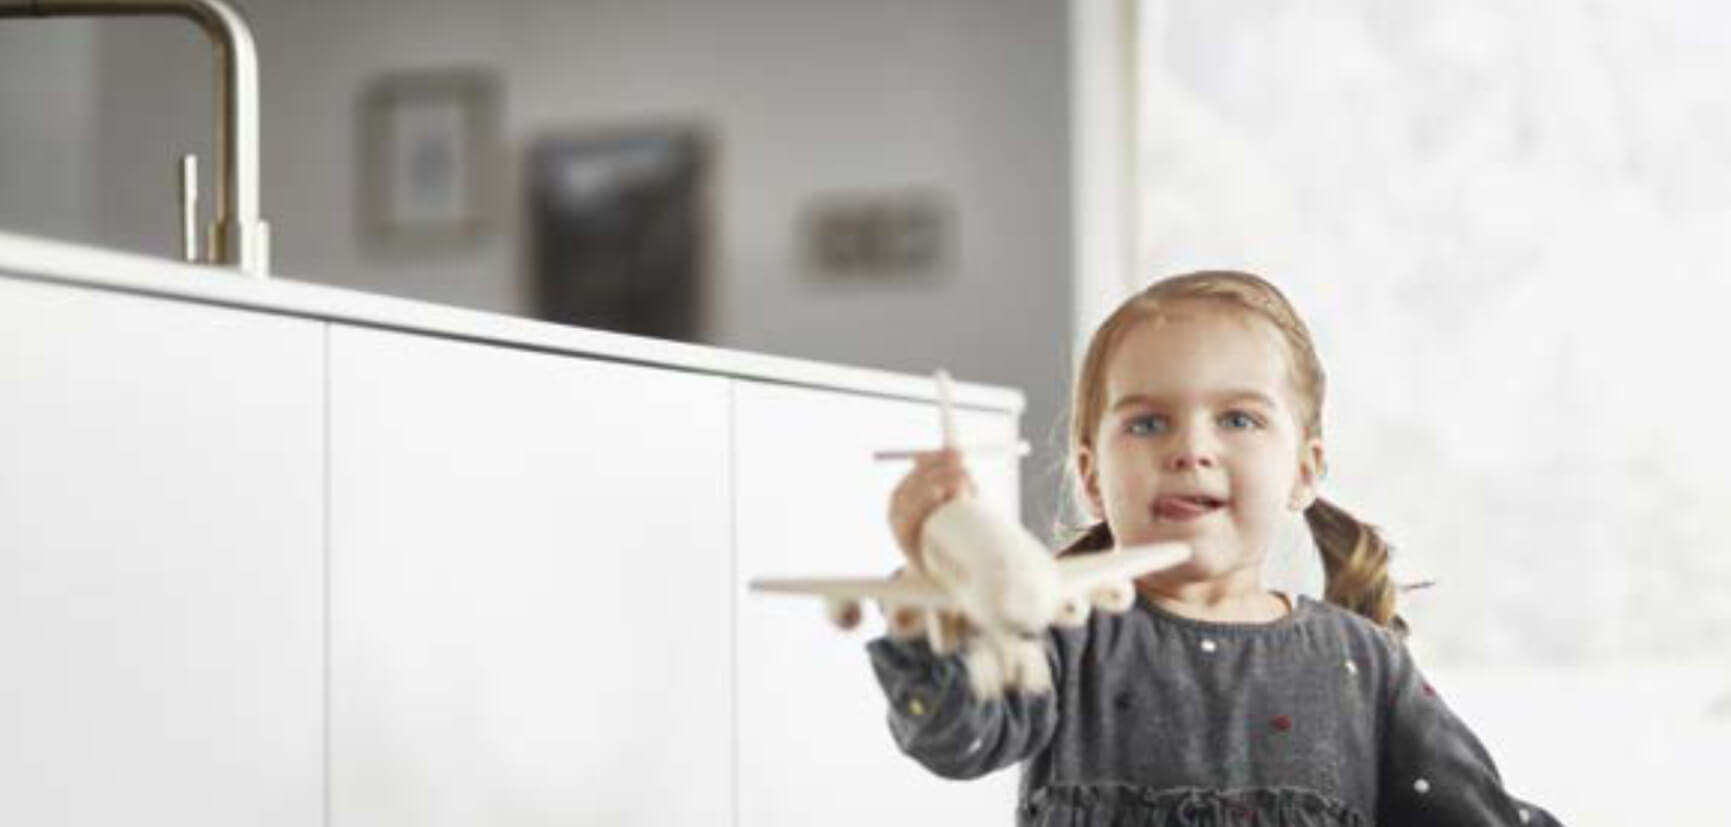 Girl playing in kitchen